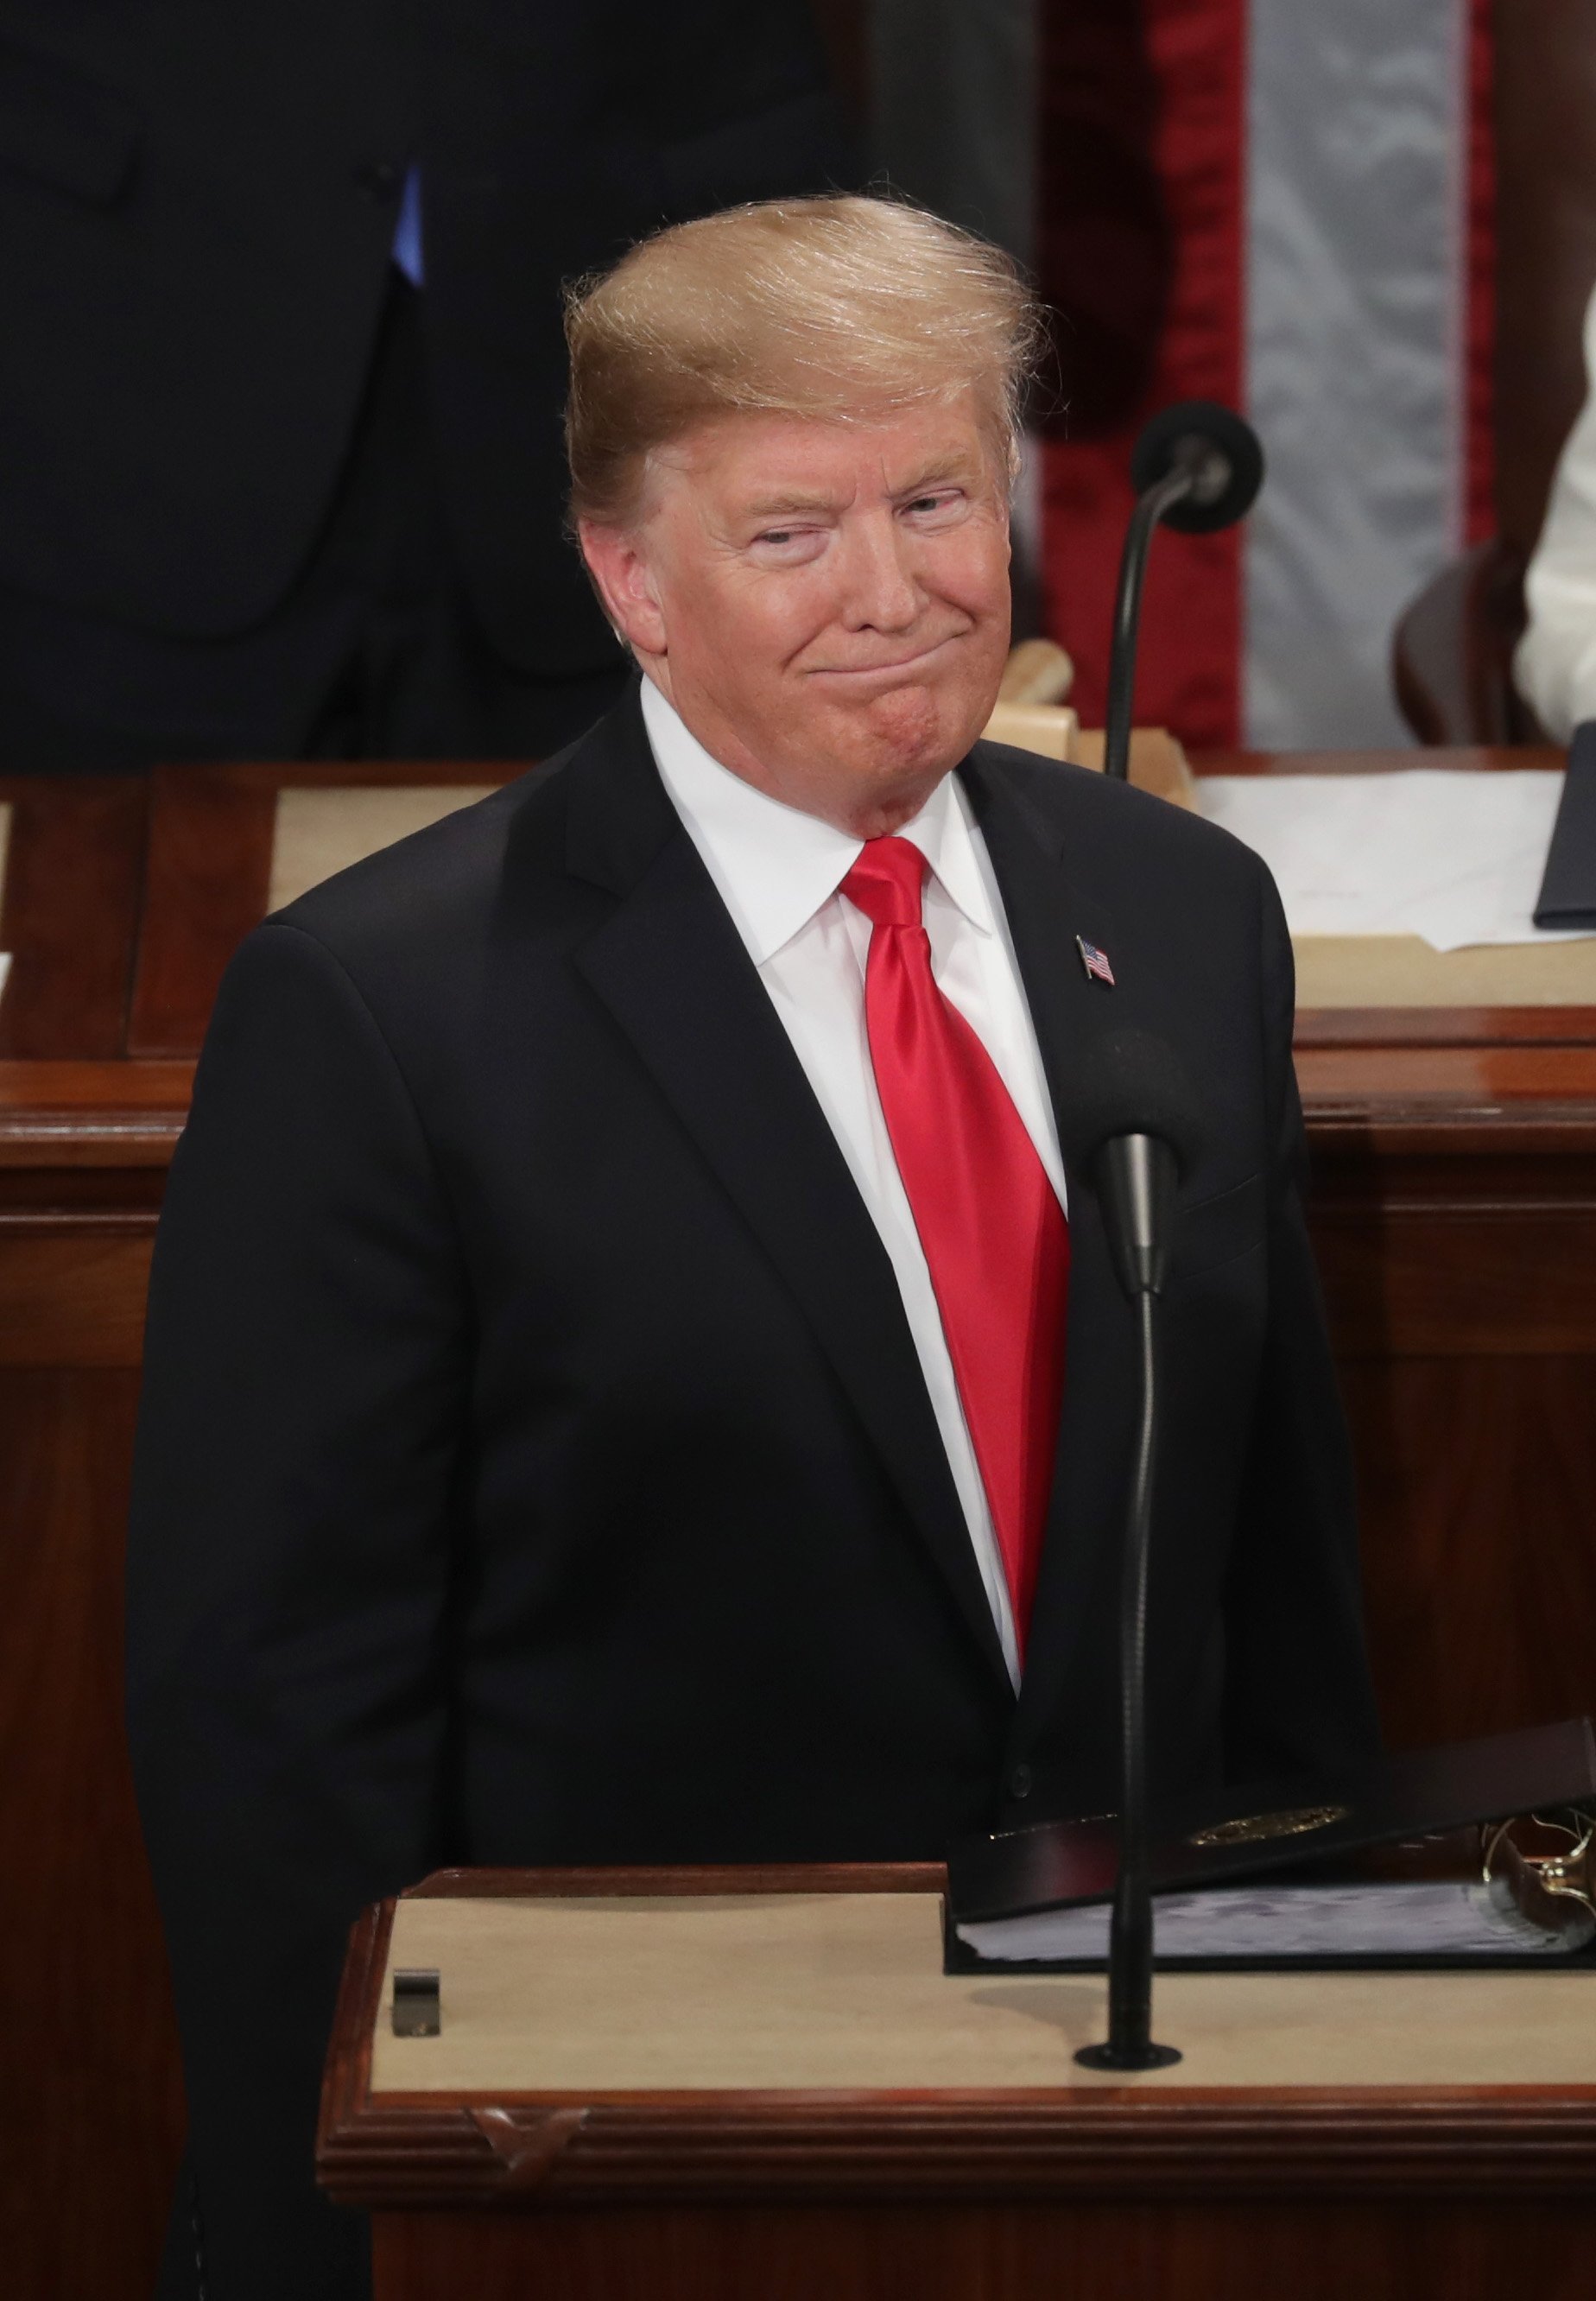 Donald Trump at the 2019 State of the Union address | Photo: Getty Images